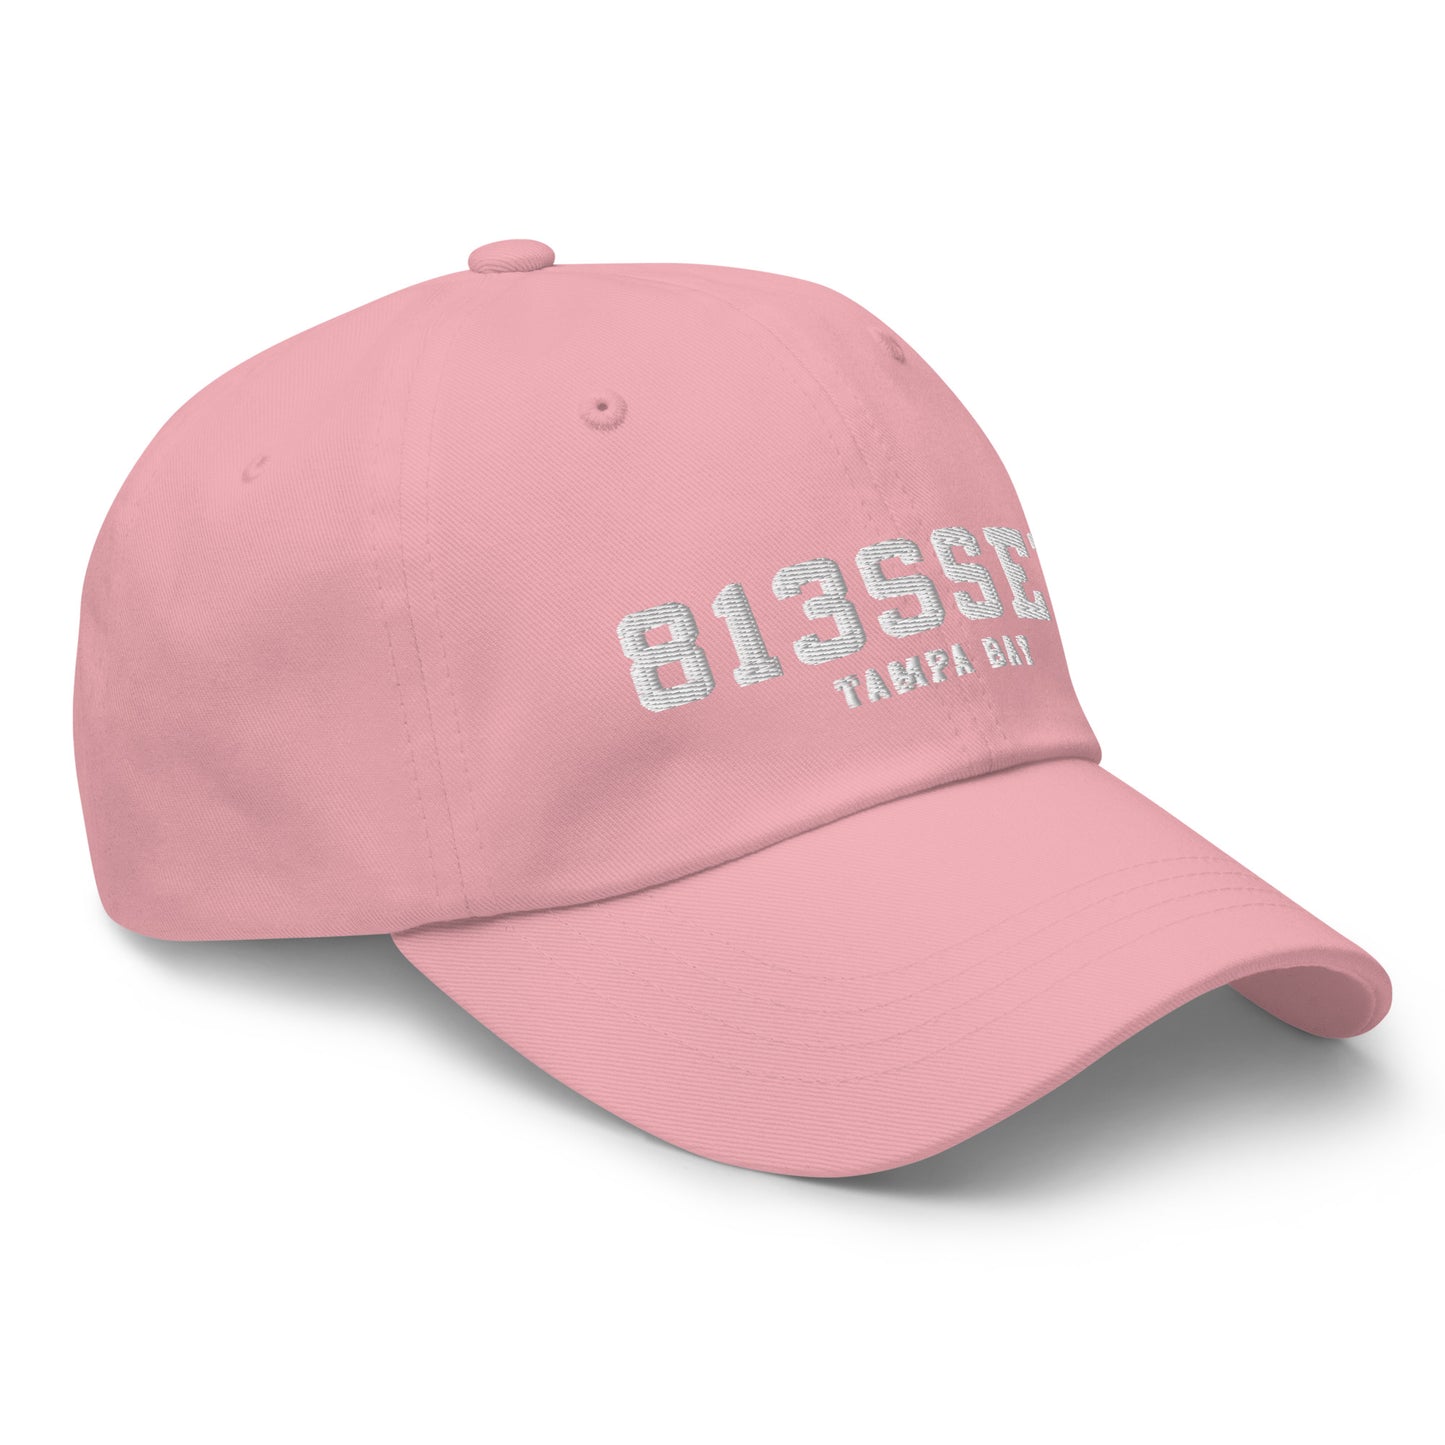 dad hats for the fam (9 colors)